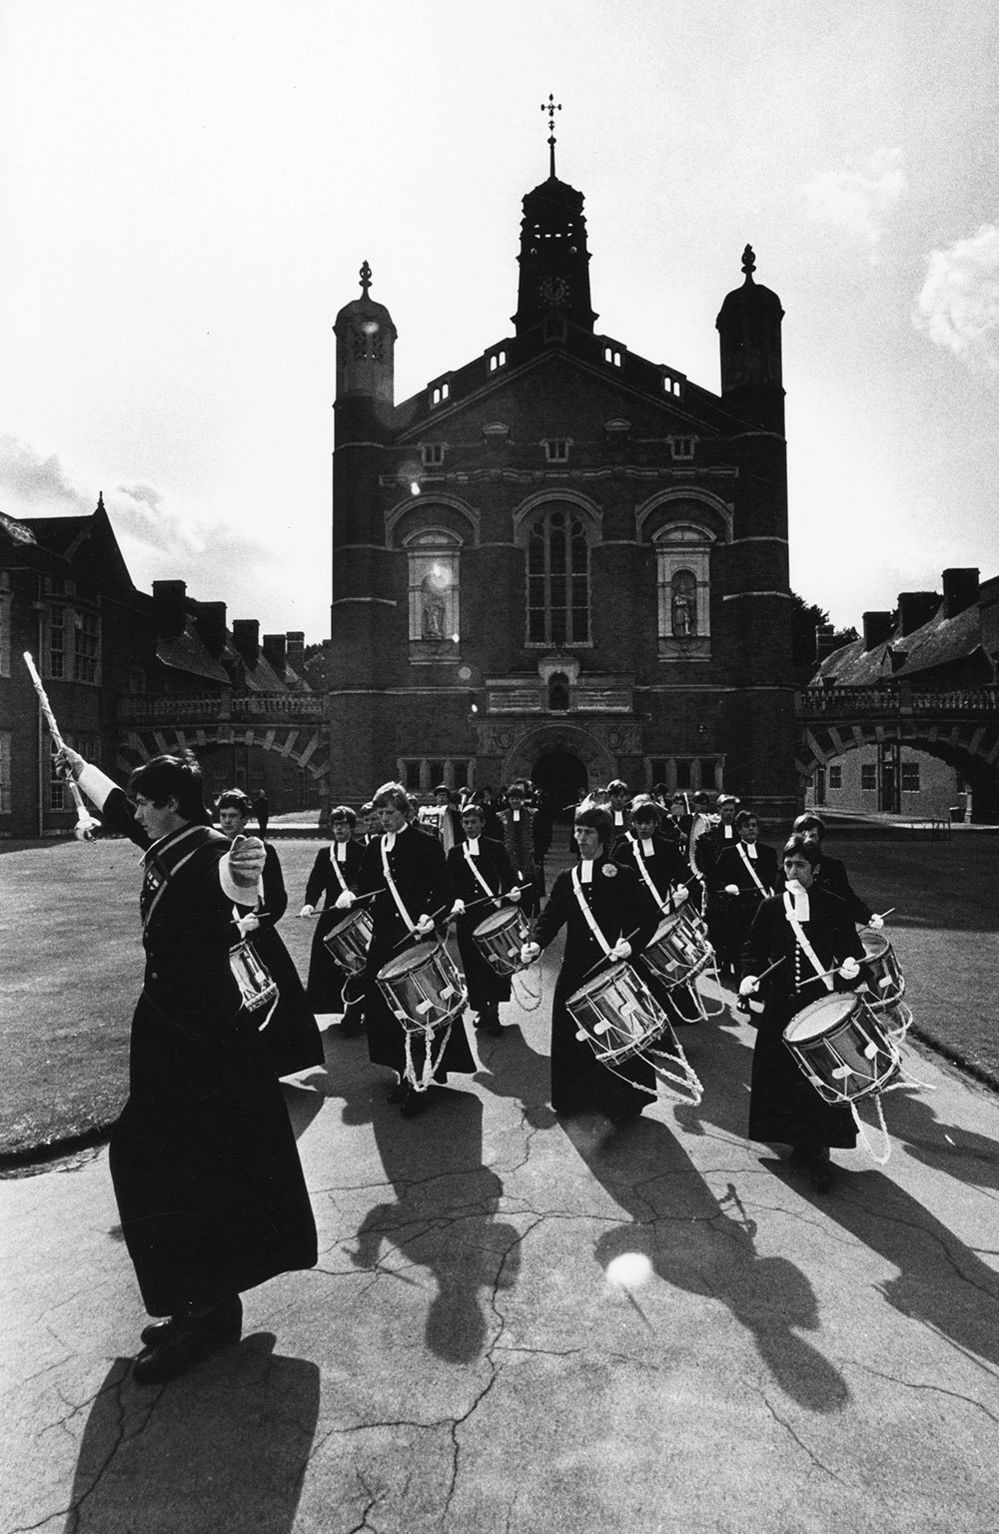 Christ's Hospital Band practising in the quad, Horsham, West Sussex